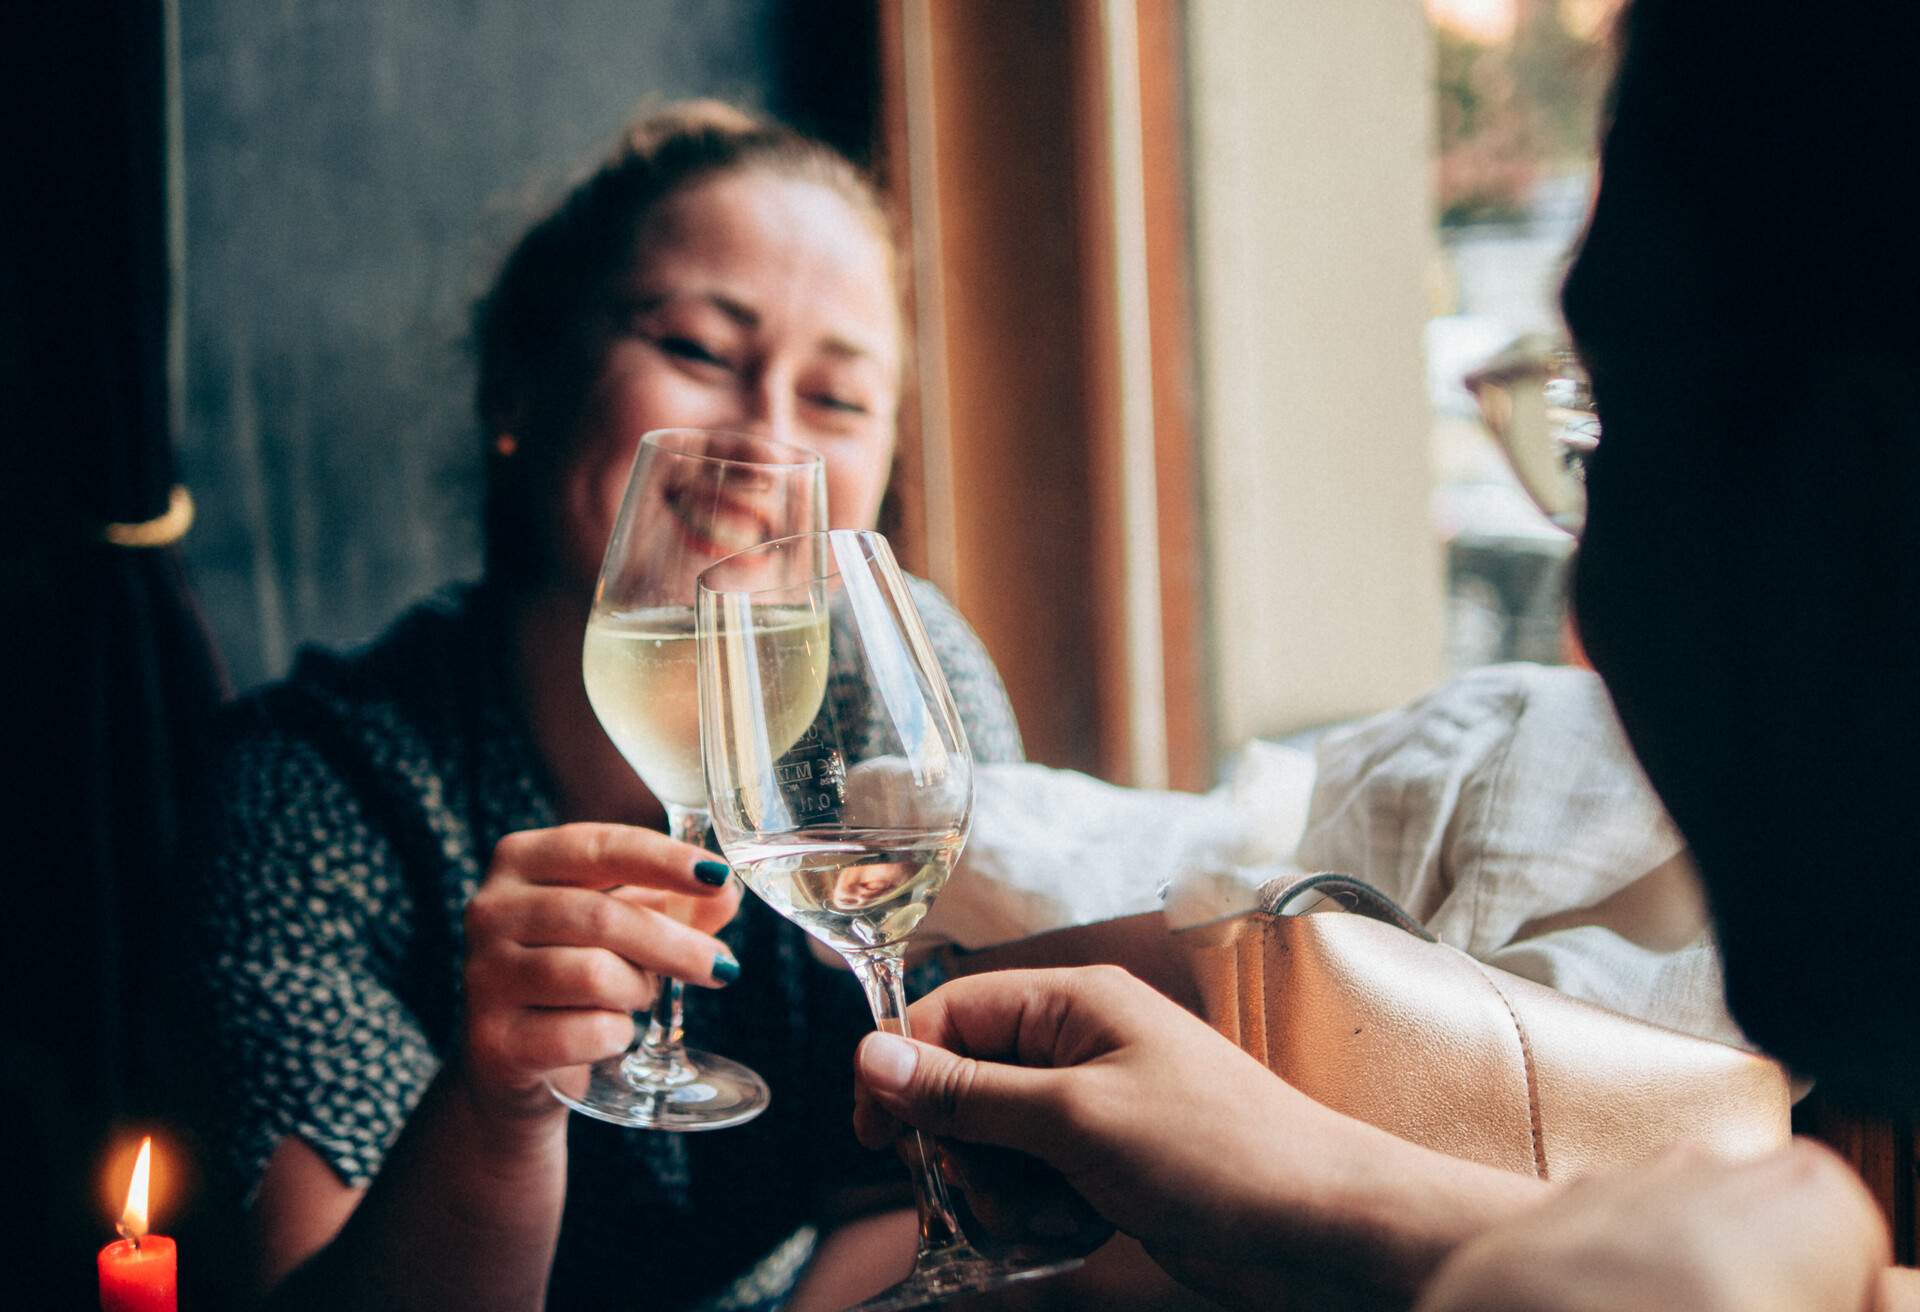 A woman smiling as she clinks her wine glass with the person in front of her.